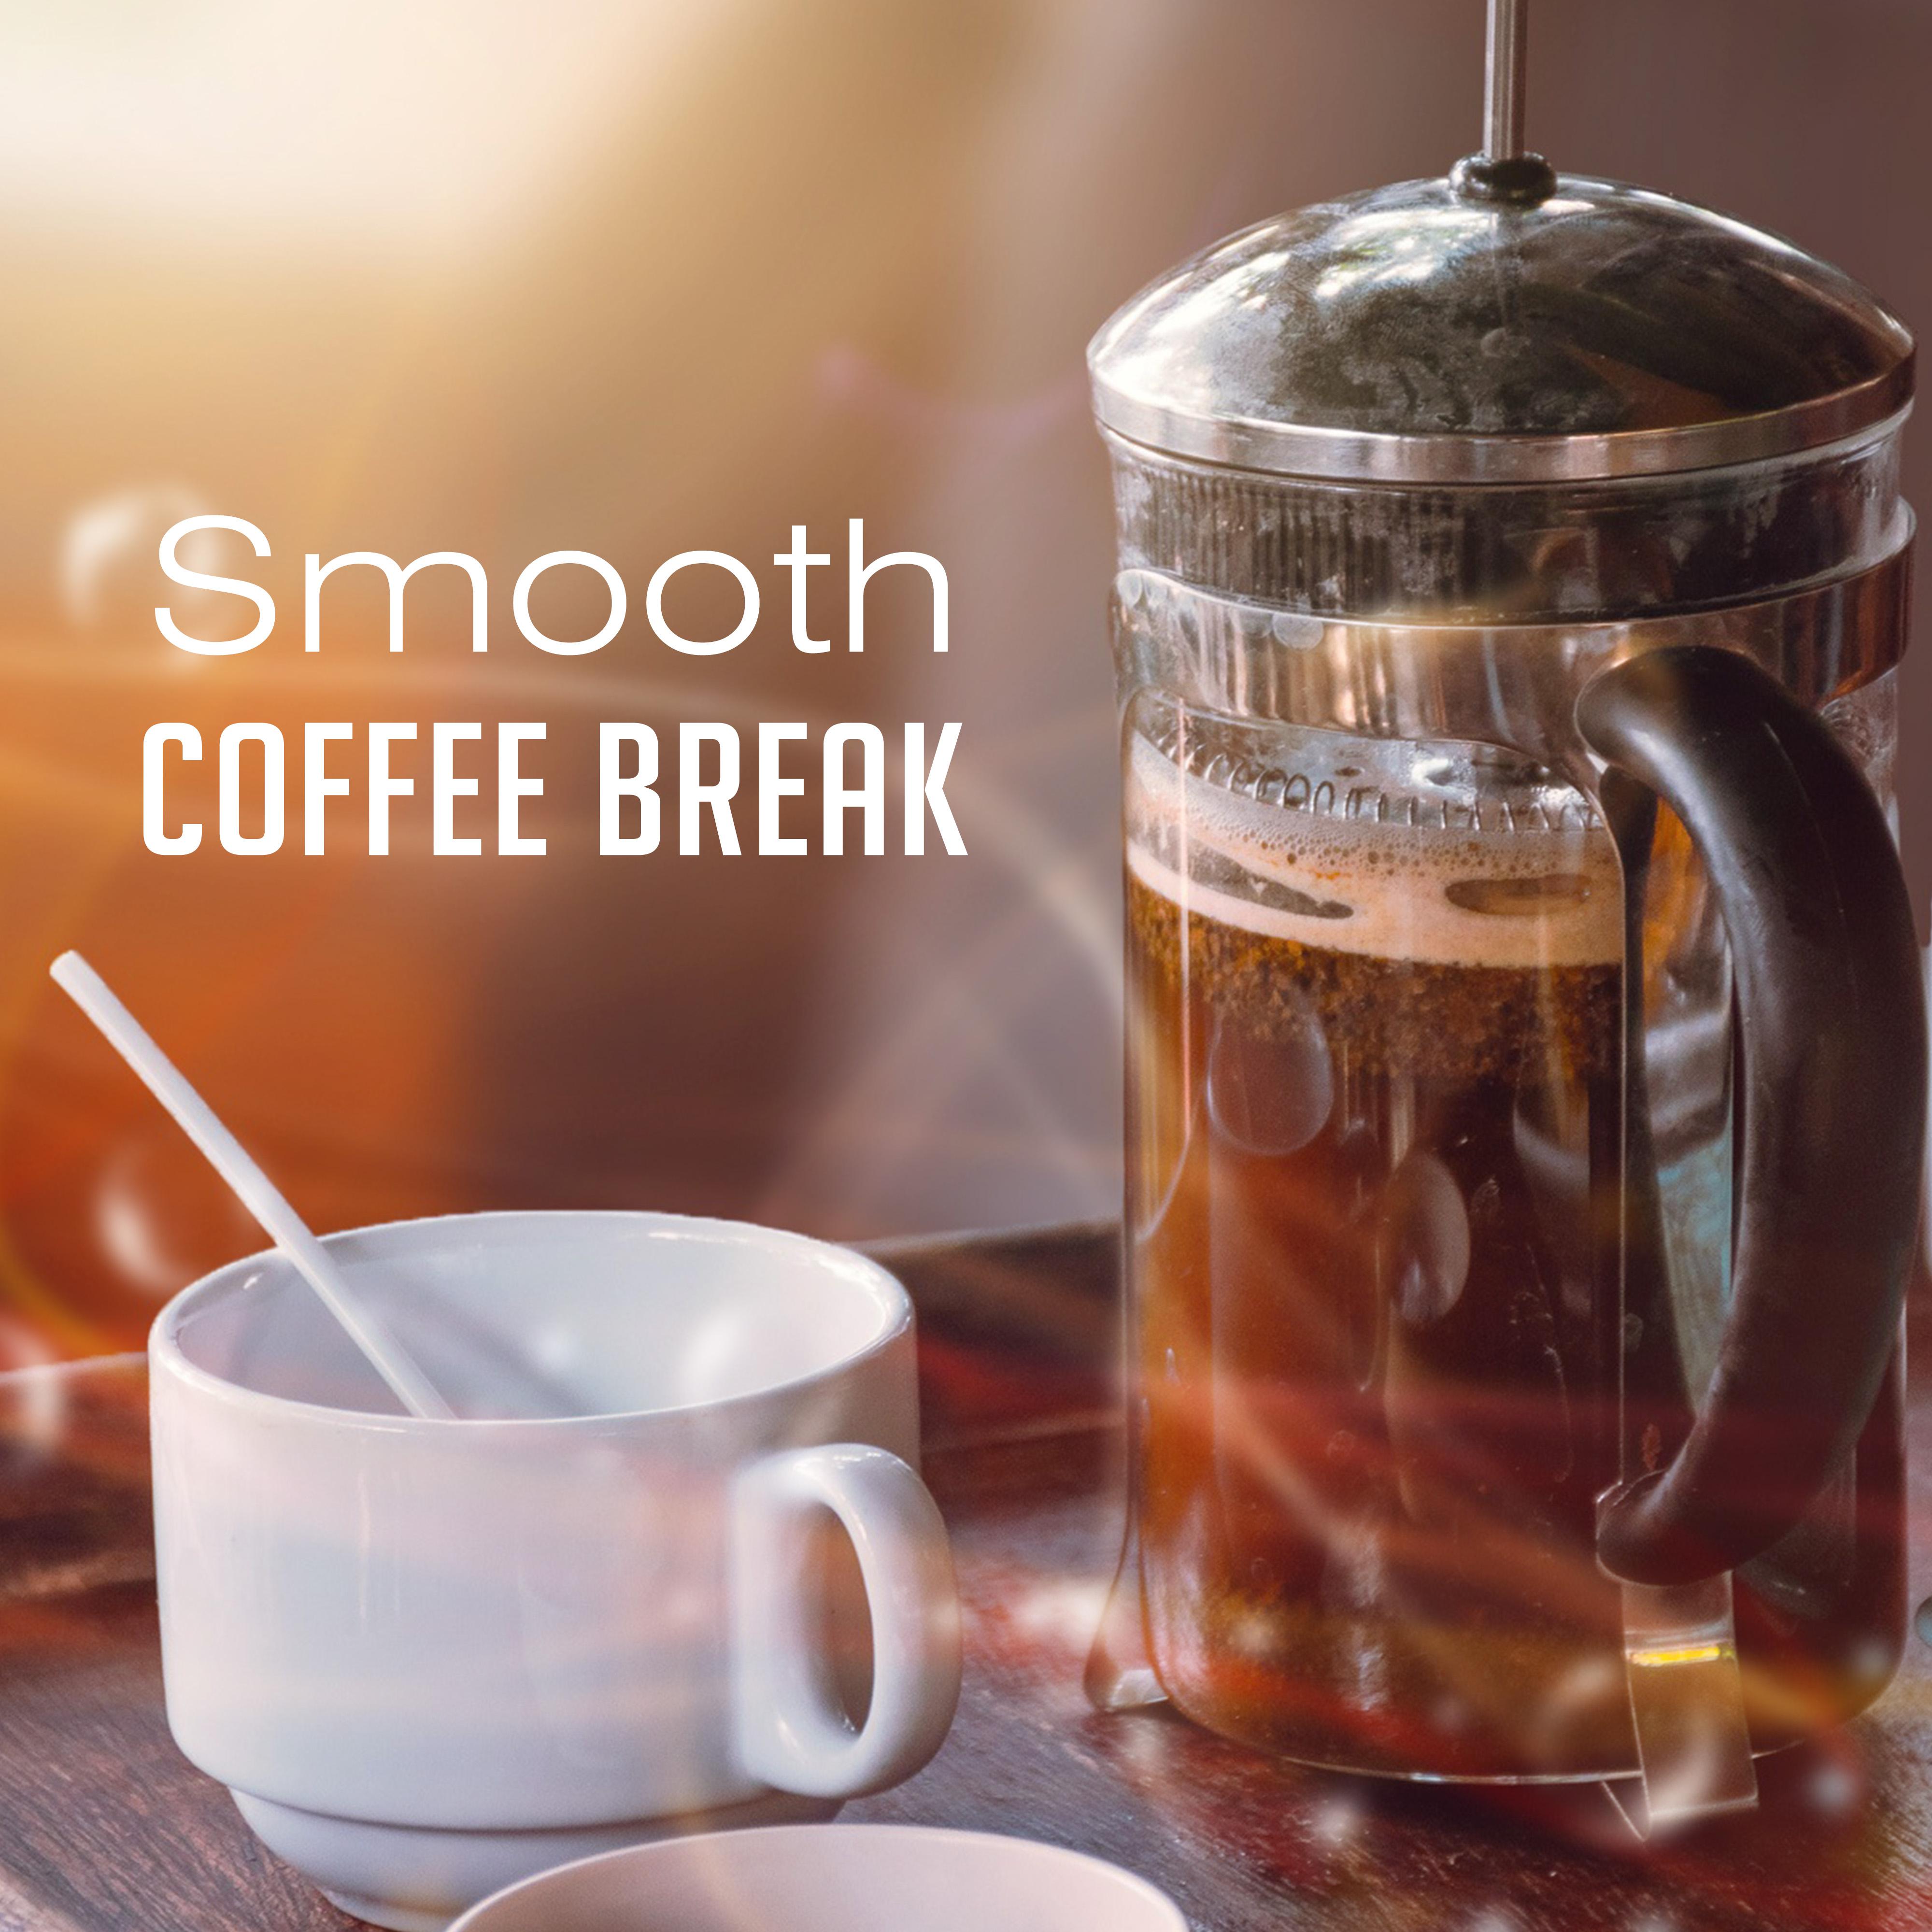 Smooth Coffee Break  Jazz Note, Instrumental Relaxation, Rest at Break, Time to Relax